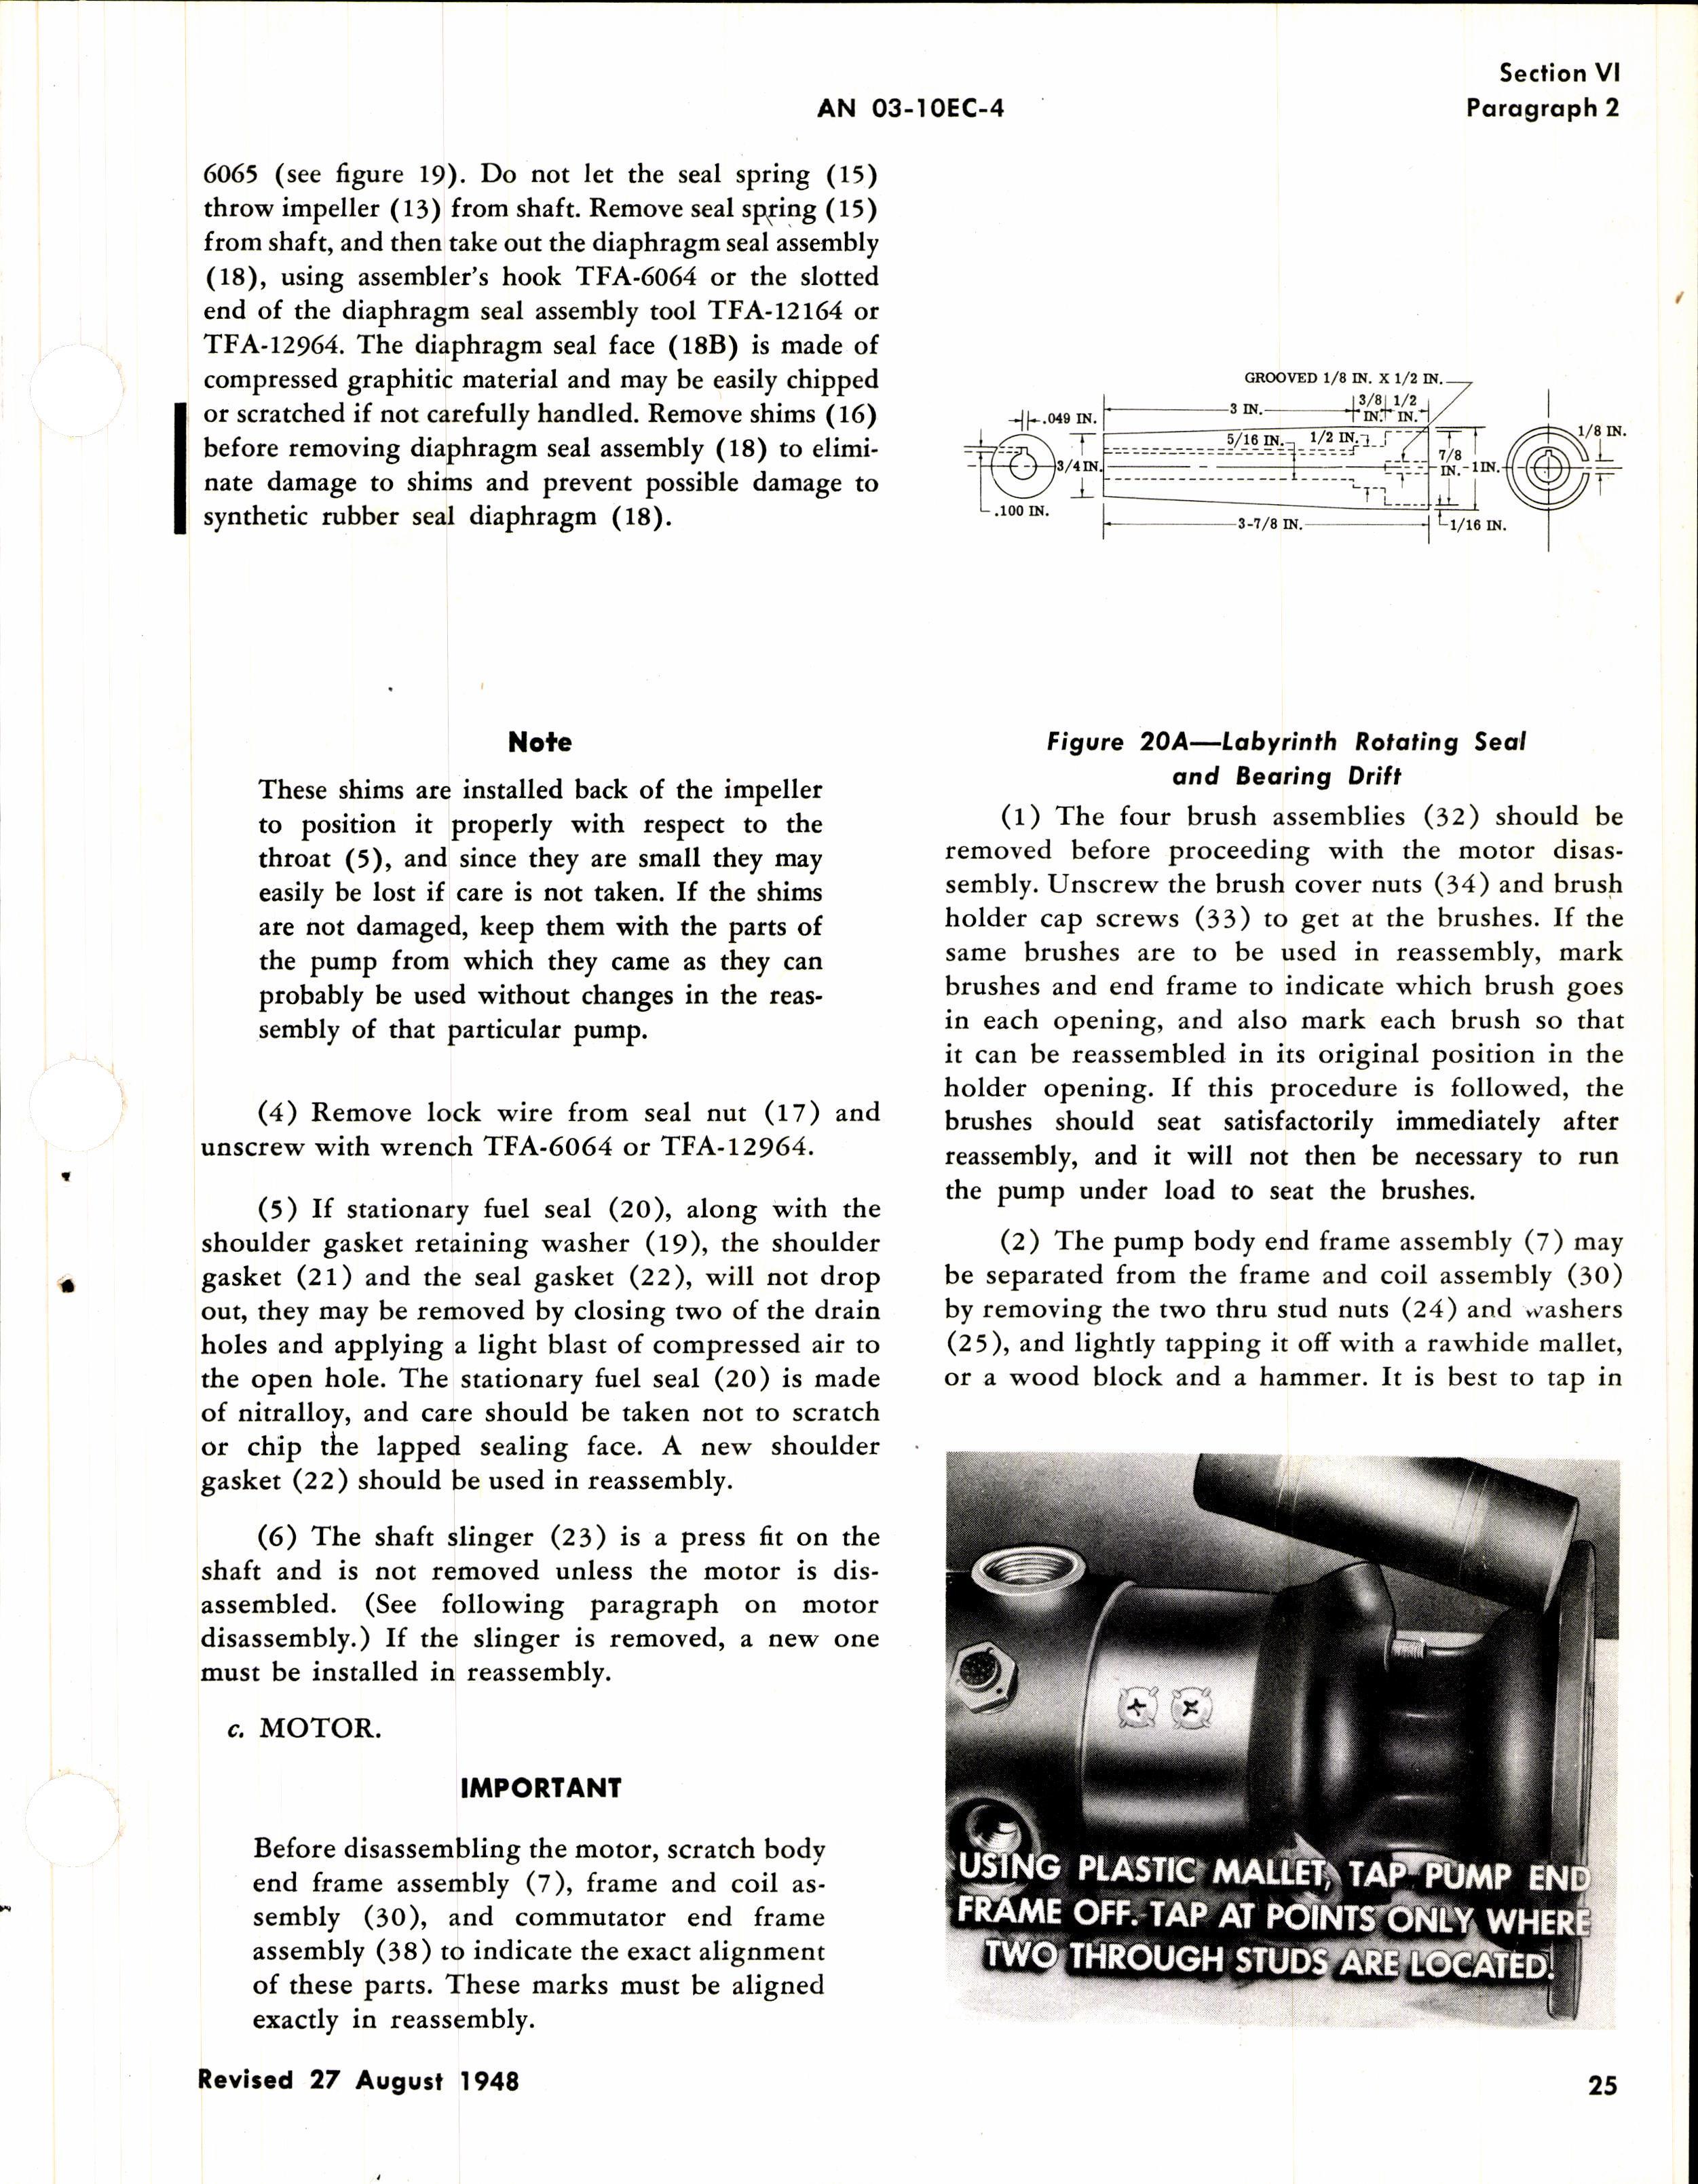 Sample page 3 from AirCorps Library document: Operation, Service, & Overhaul Instructions with Parts Catalog for Thompson Fuel Booster Pumps